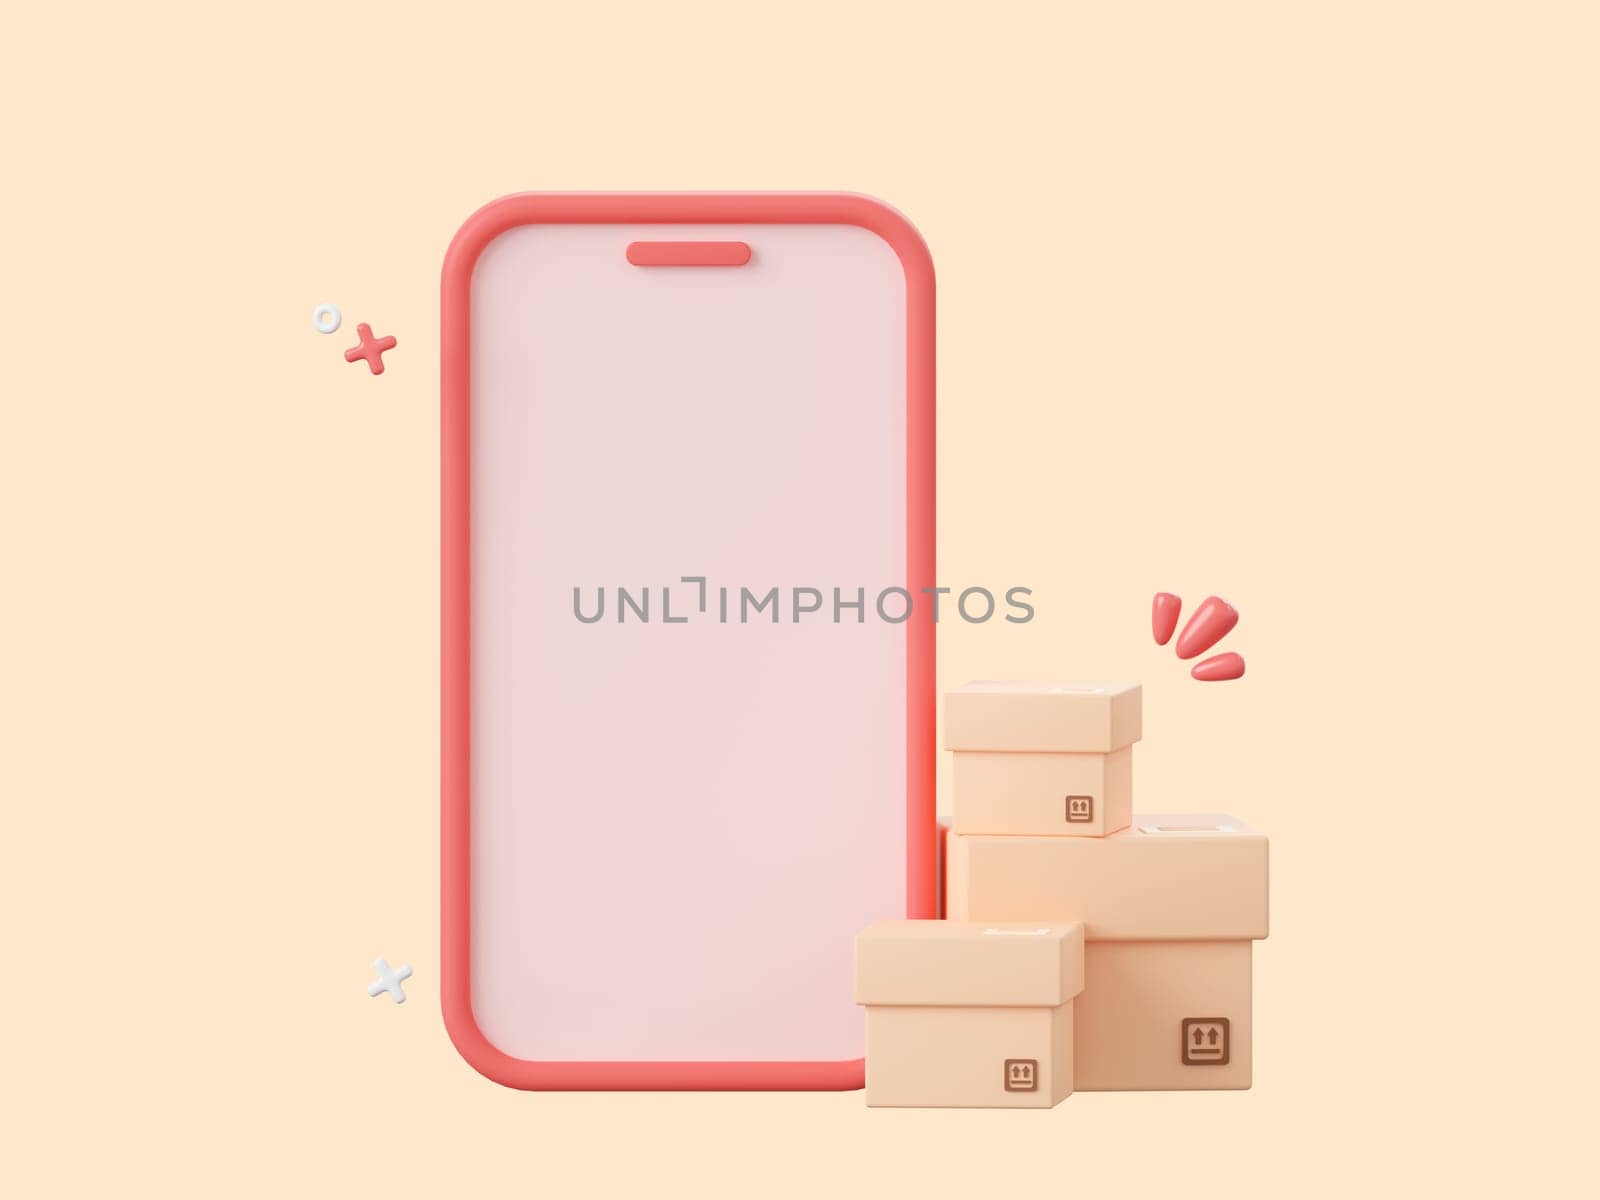 3d cartoon design illustration of Smartphone with parcel boxes, Shopping online on mobile concept.